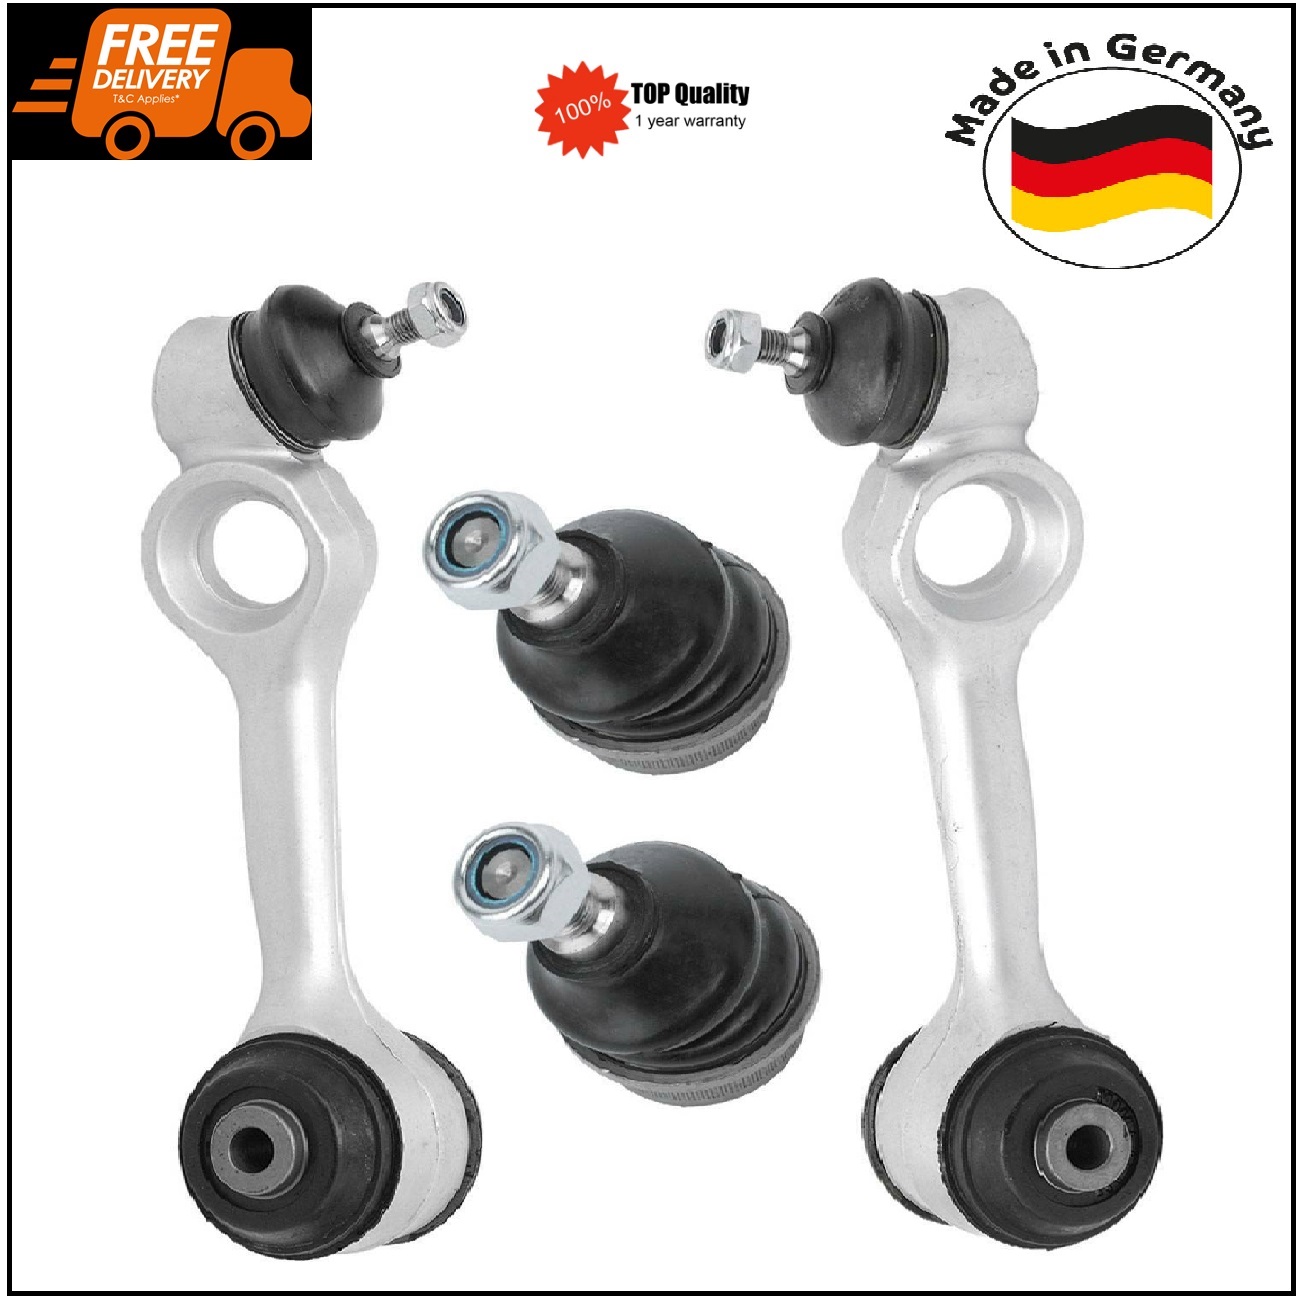 2 Upper Front Control Arms + 2 Lower Ball Joints for Mercedes W126 C126 German Made